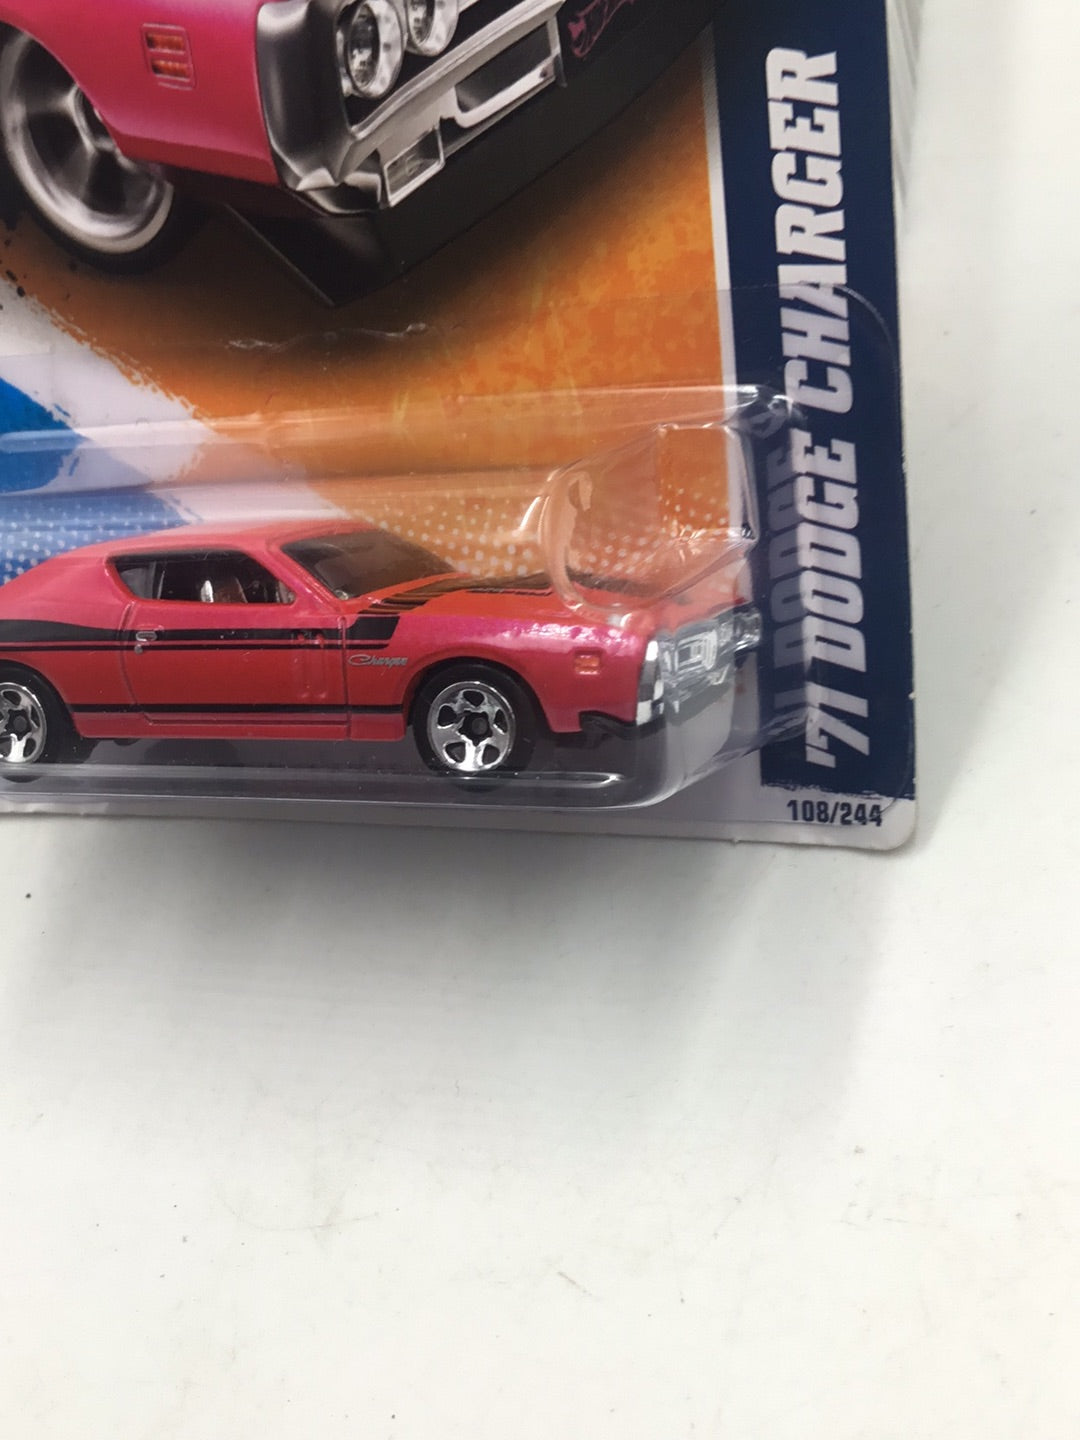 2011 Hot Wheels #108 71 Dodge Charger Pink R5